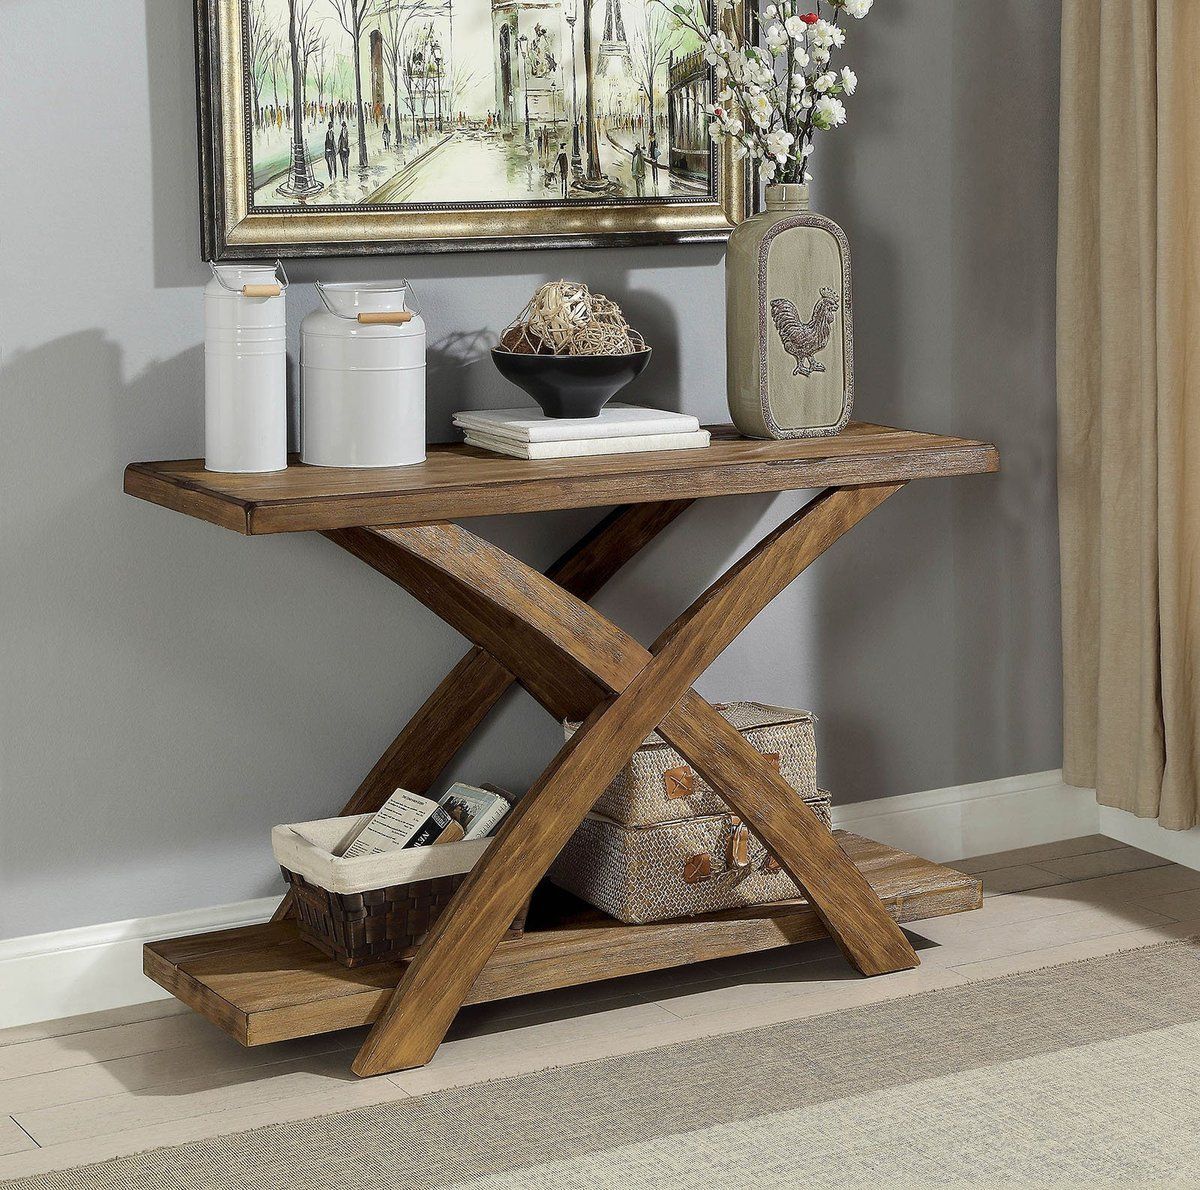 Wooden Sofa Table With Open Bottom Shelf And X Shaped Base, Antique In Vintage Gray Oak Console Tables (View 5 of 20)